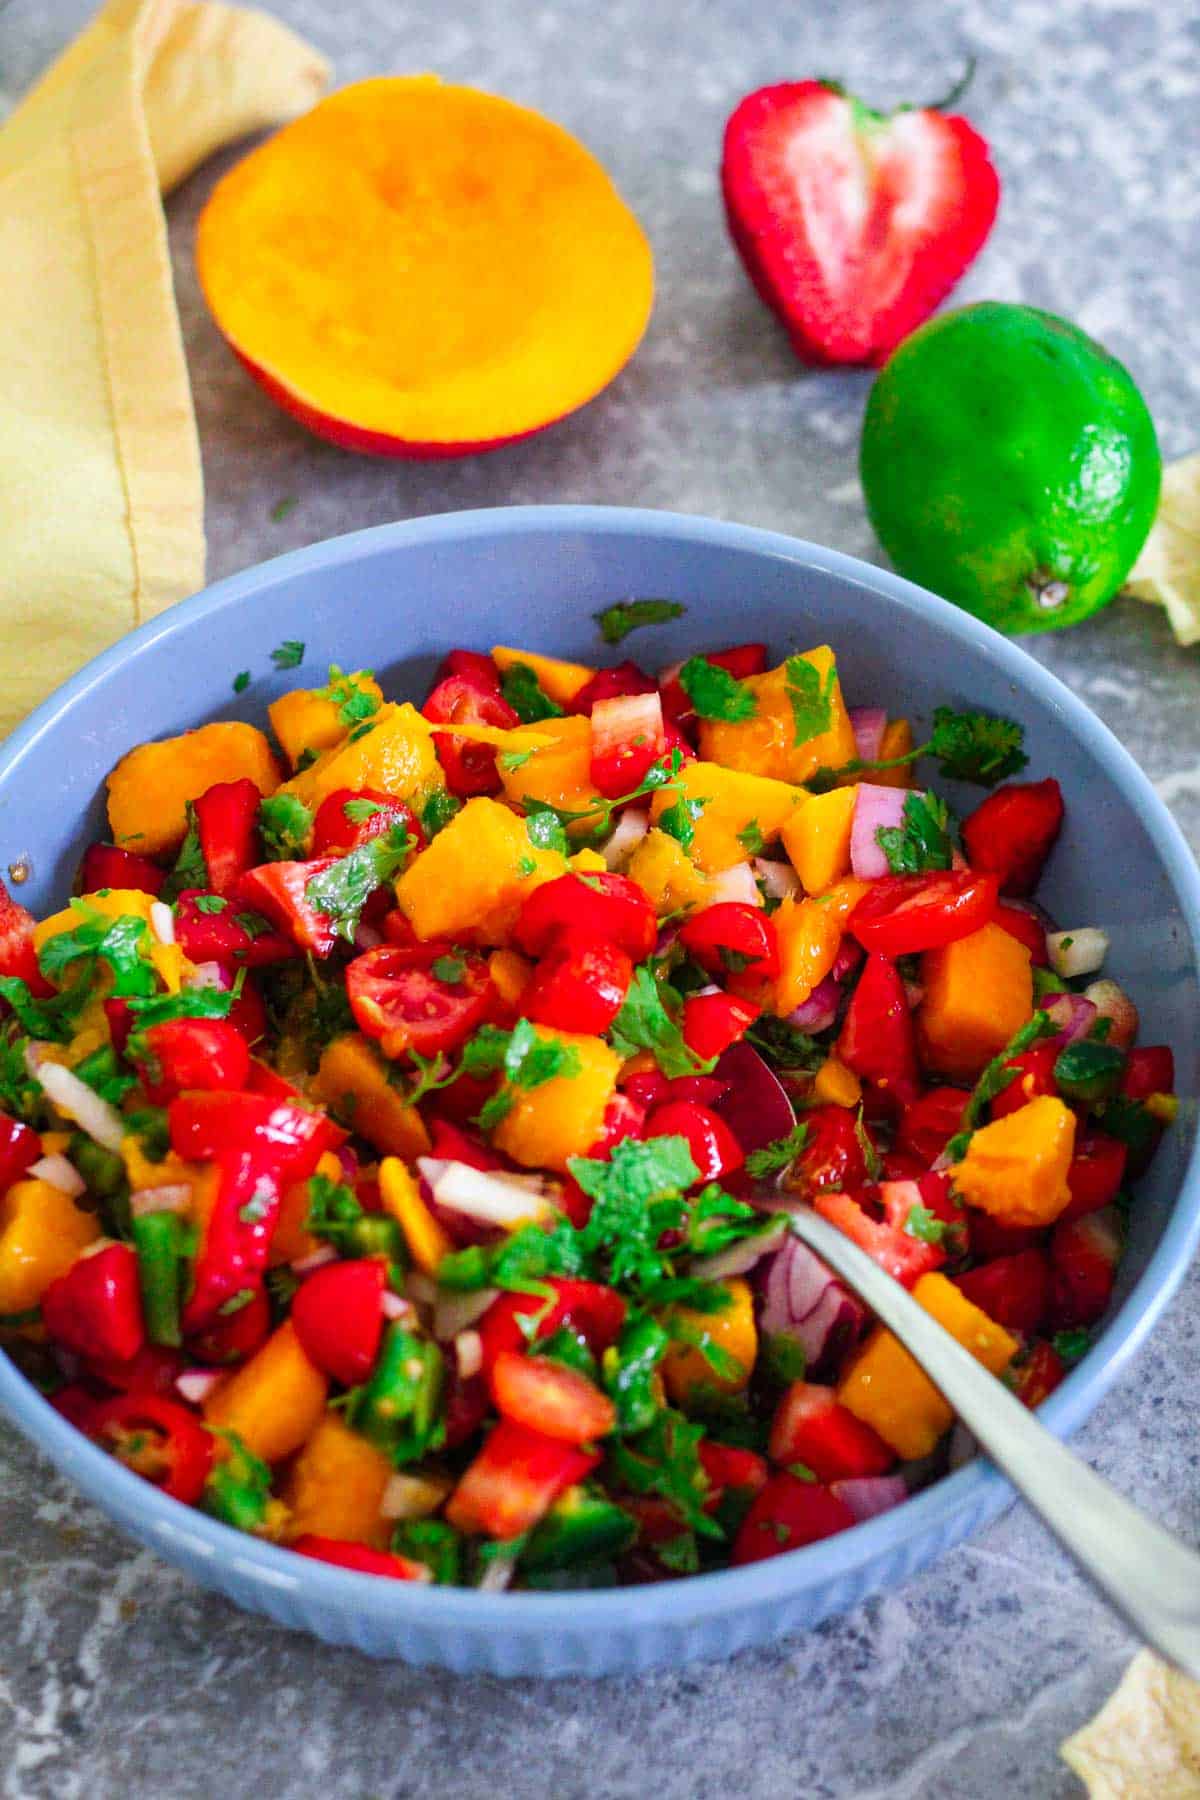 A colorful salsa with mango, strawberries, cilantro etc on a blue bowl surrounded by lime, mango and strawberry on the counter.